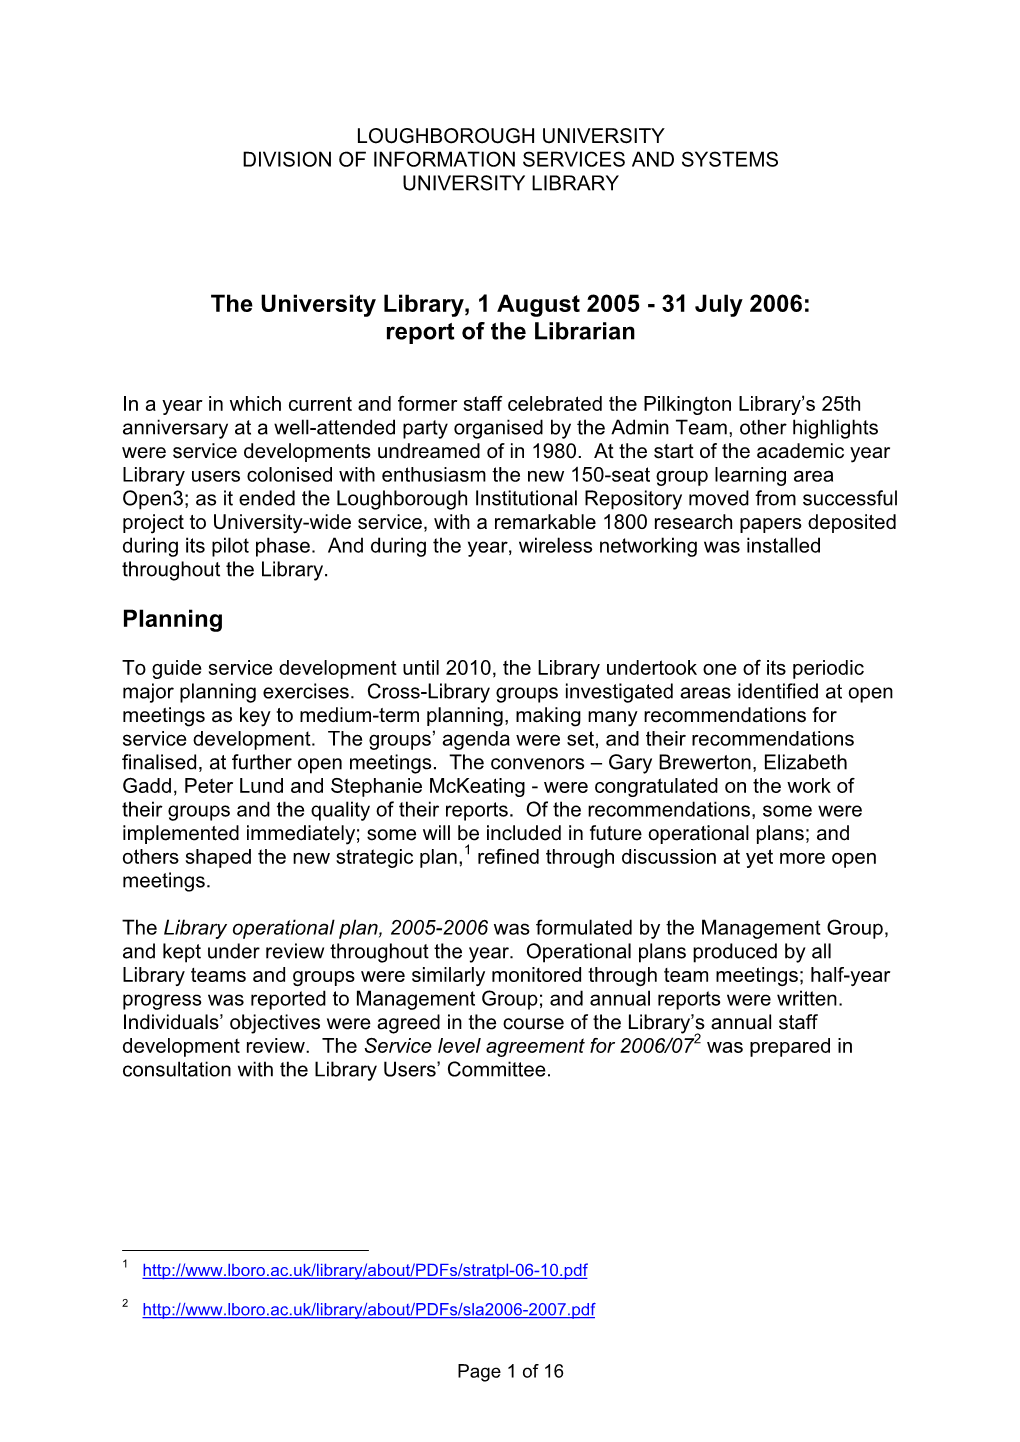 The University Library, 1 August 2005 - 31 July 2006: Report of the Librarian